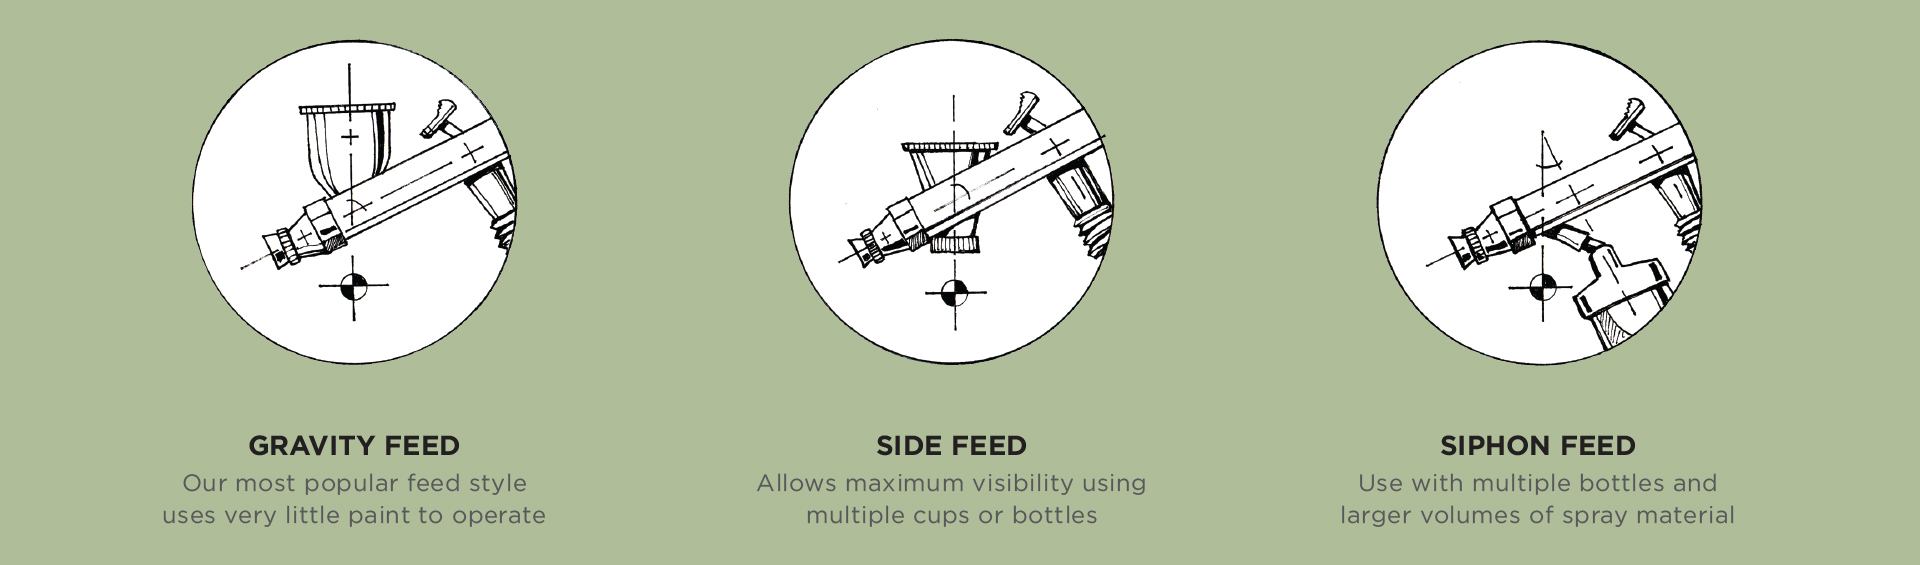 Diagram of three airbrush feed styles including gravity, siphon and side feed